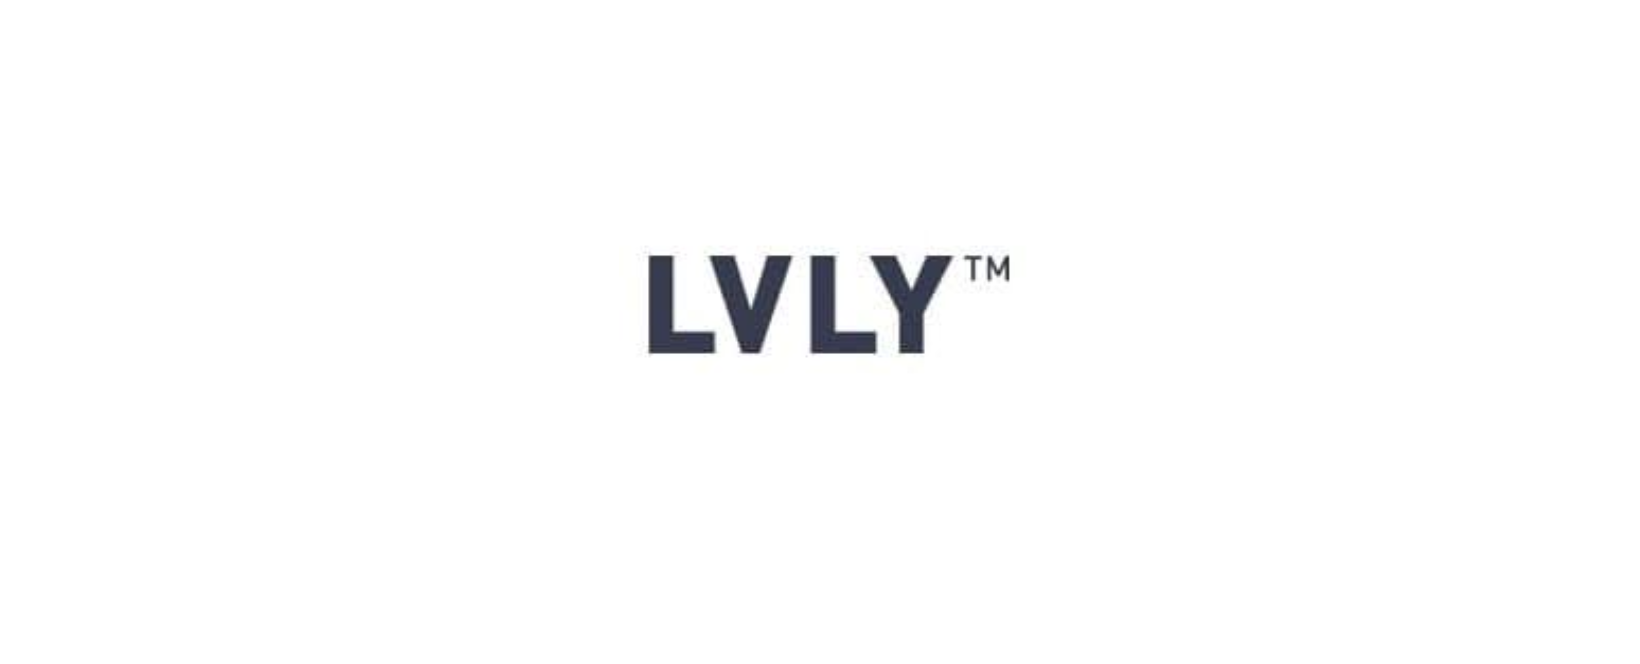 LVLY Discount Code 2022